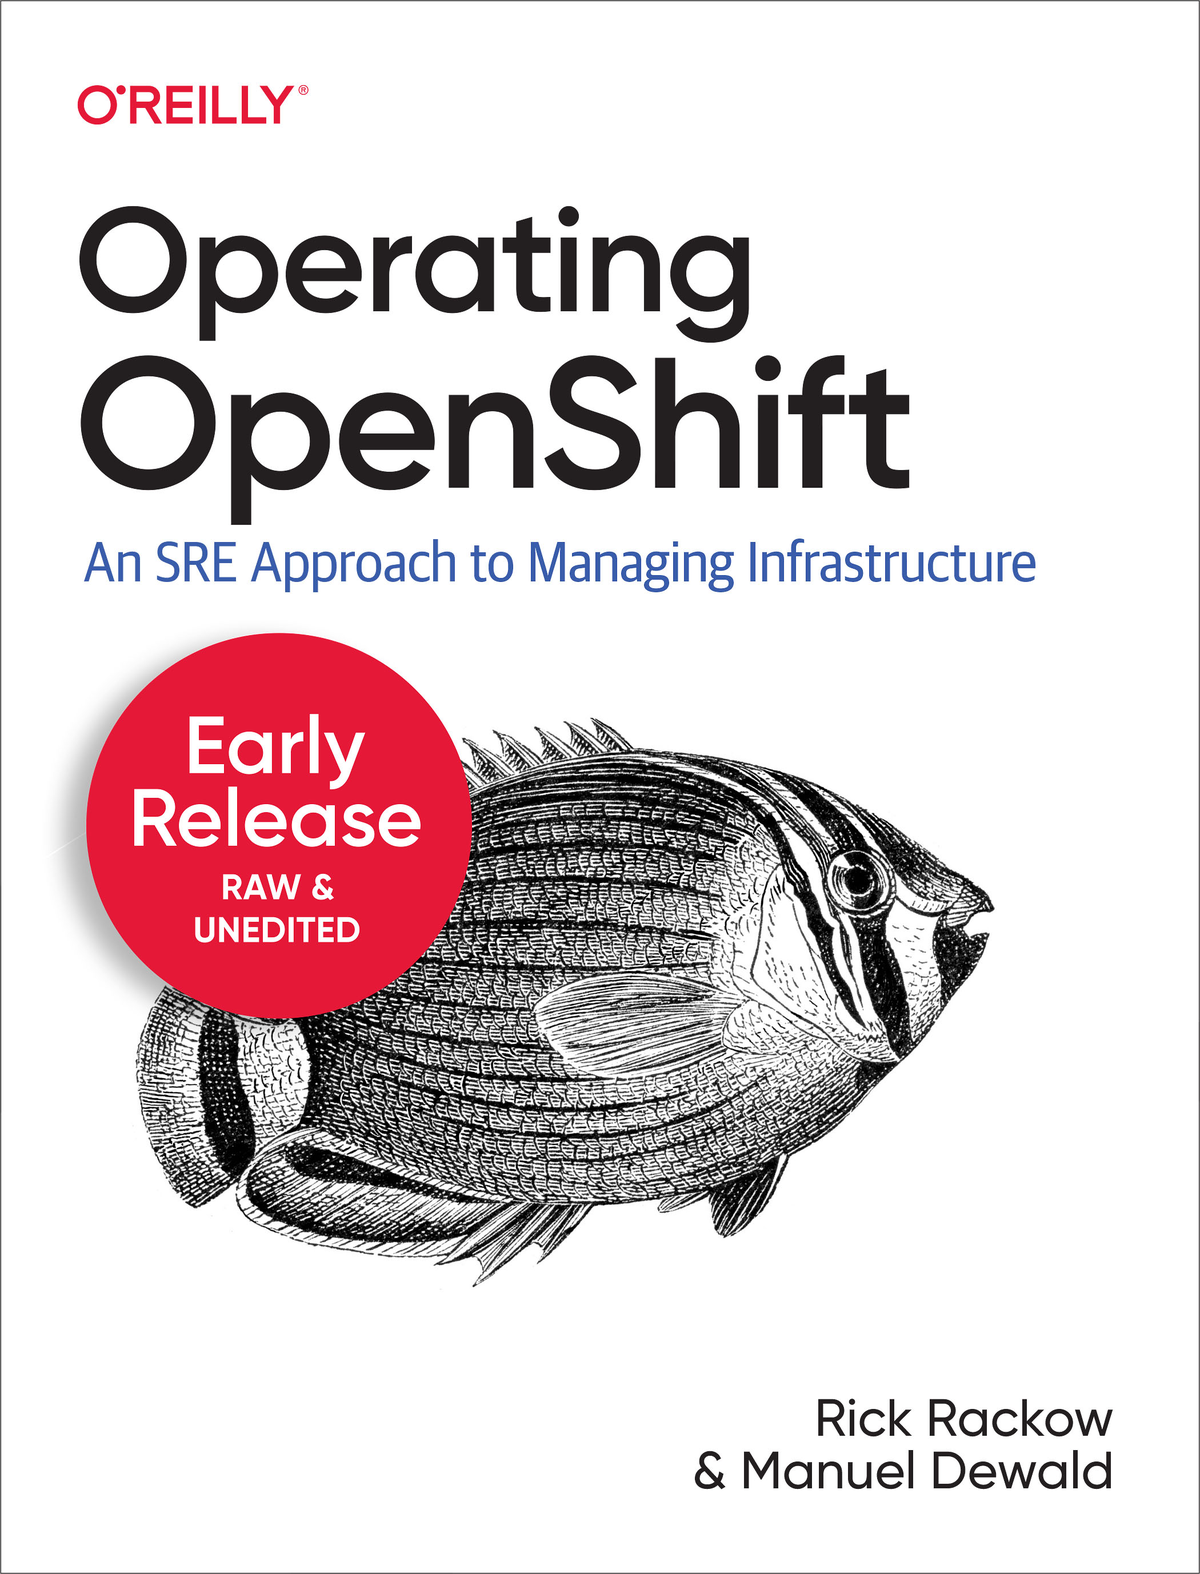 Operating OpenShift by Rick Rackow and Manuel Dewald Copyright 2022 Rick - photo 1